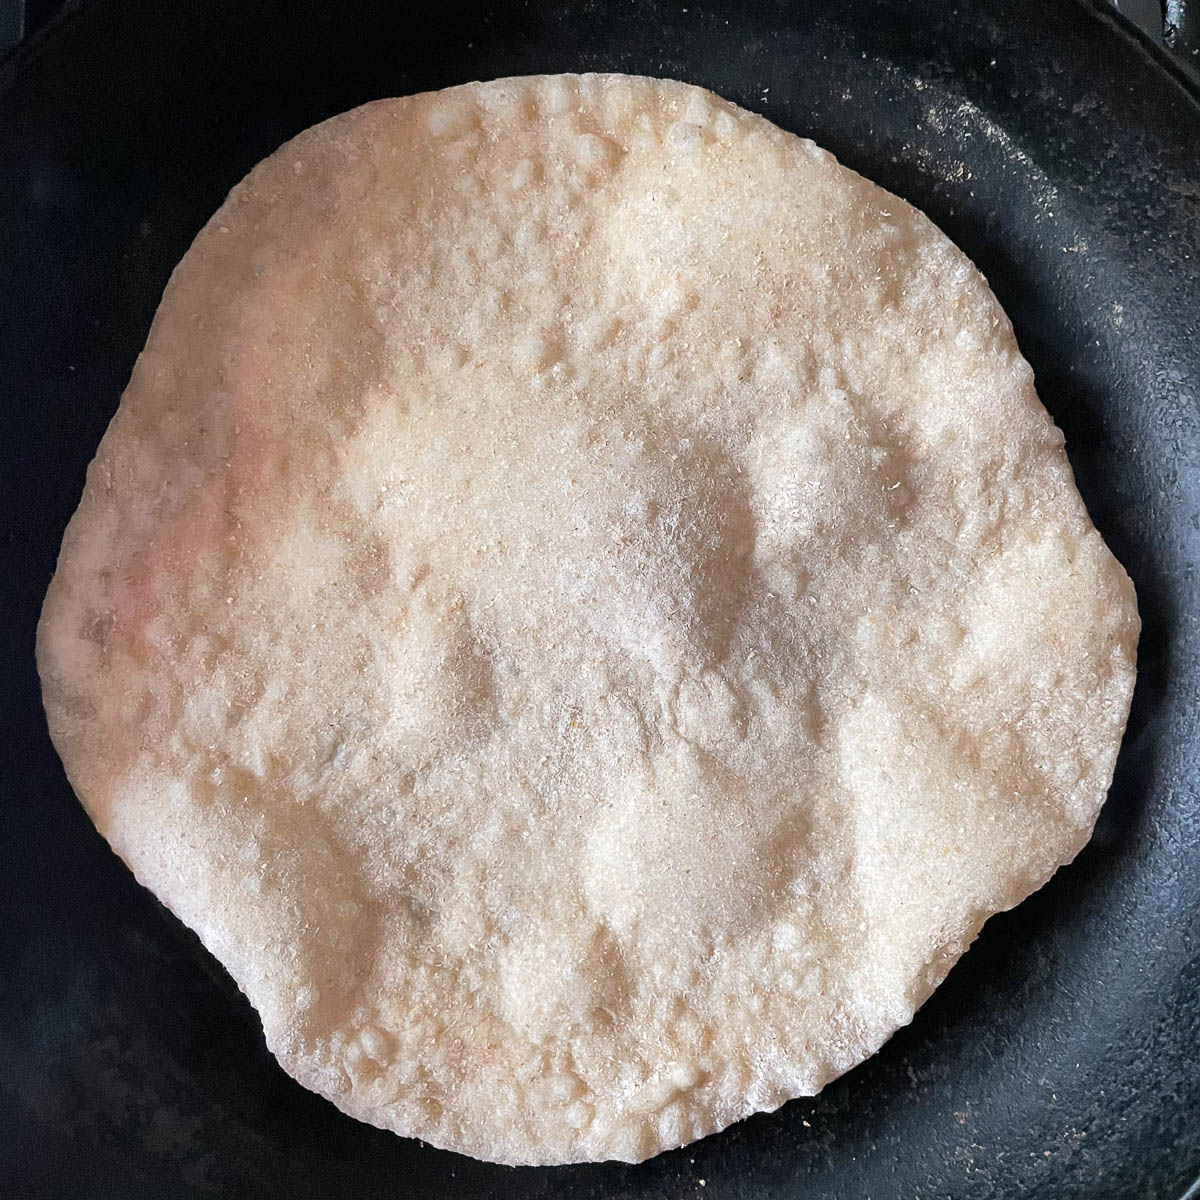 Armenian lavash flatbread cooking in a pan with uncooked side up